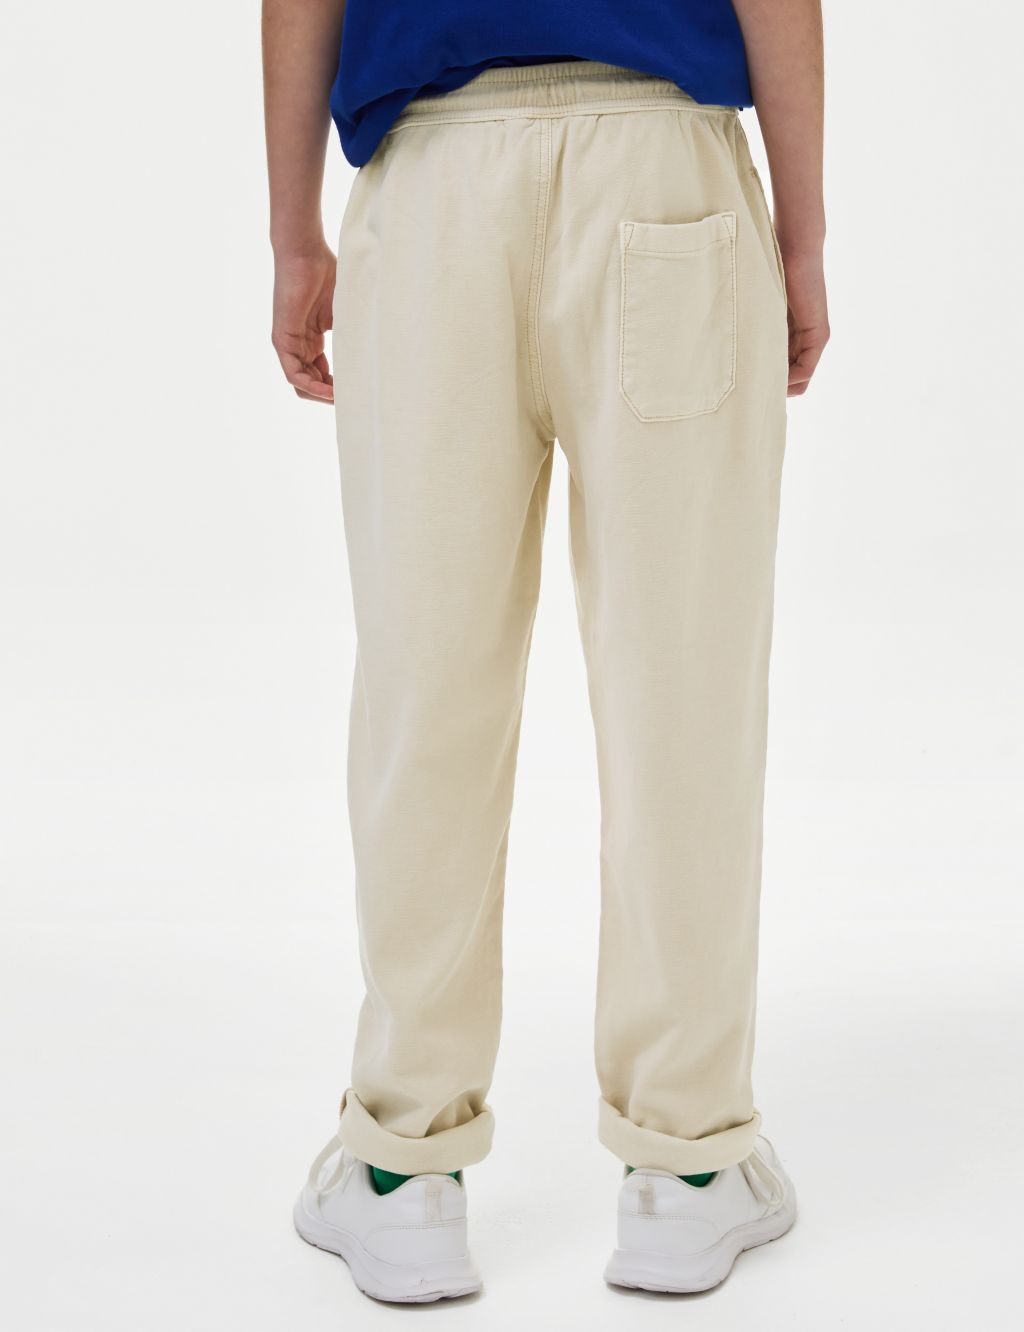 Relaxed Cotton Rich Skater Chinos (6-16 Yrs) image 5